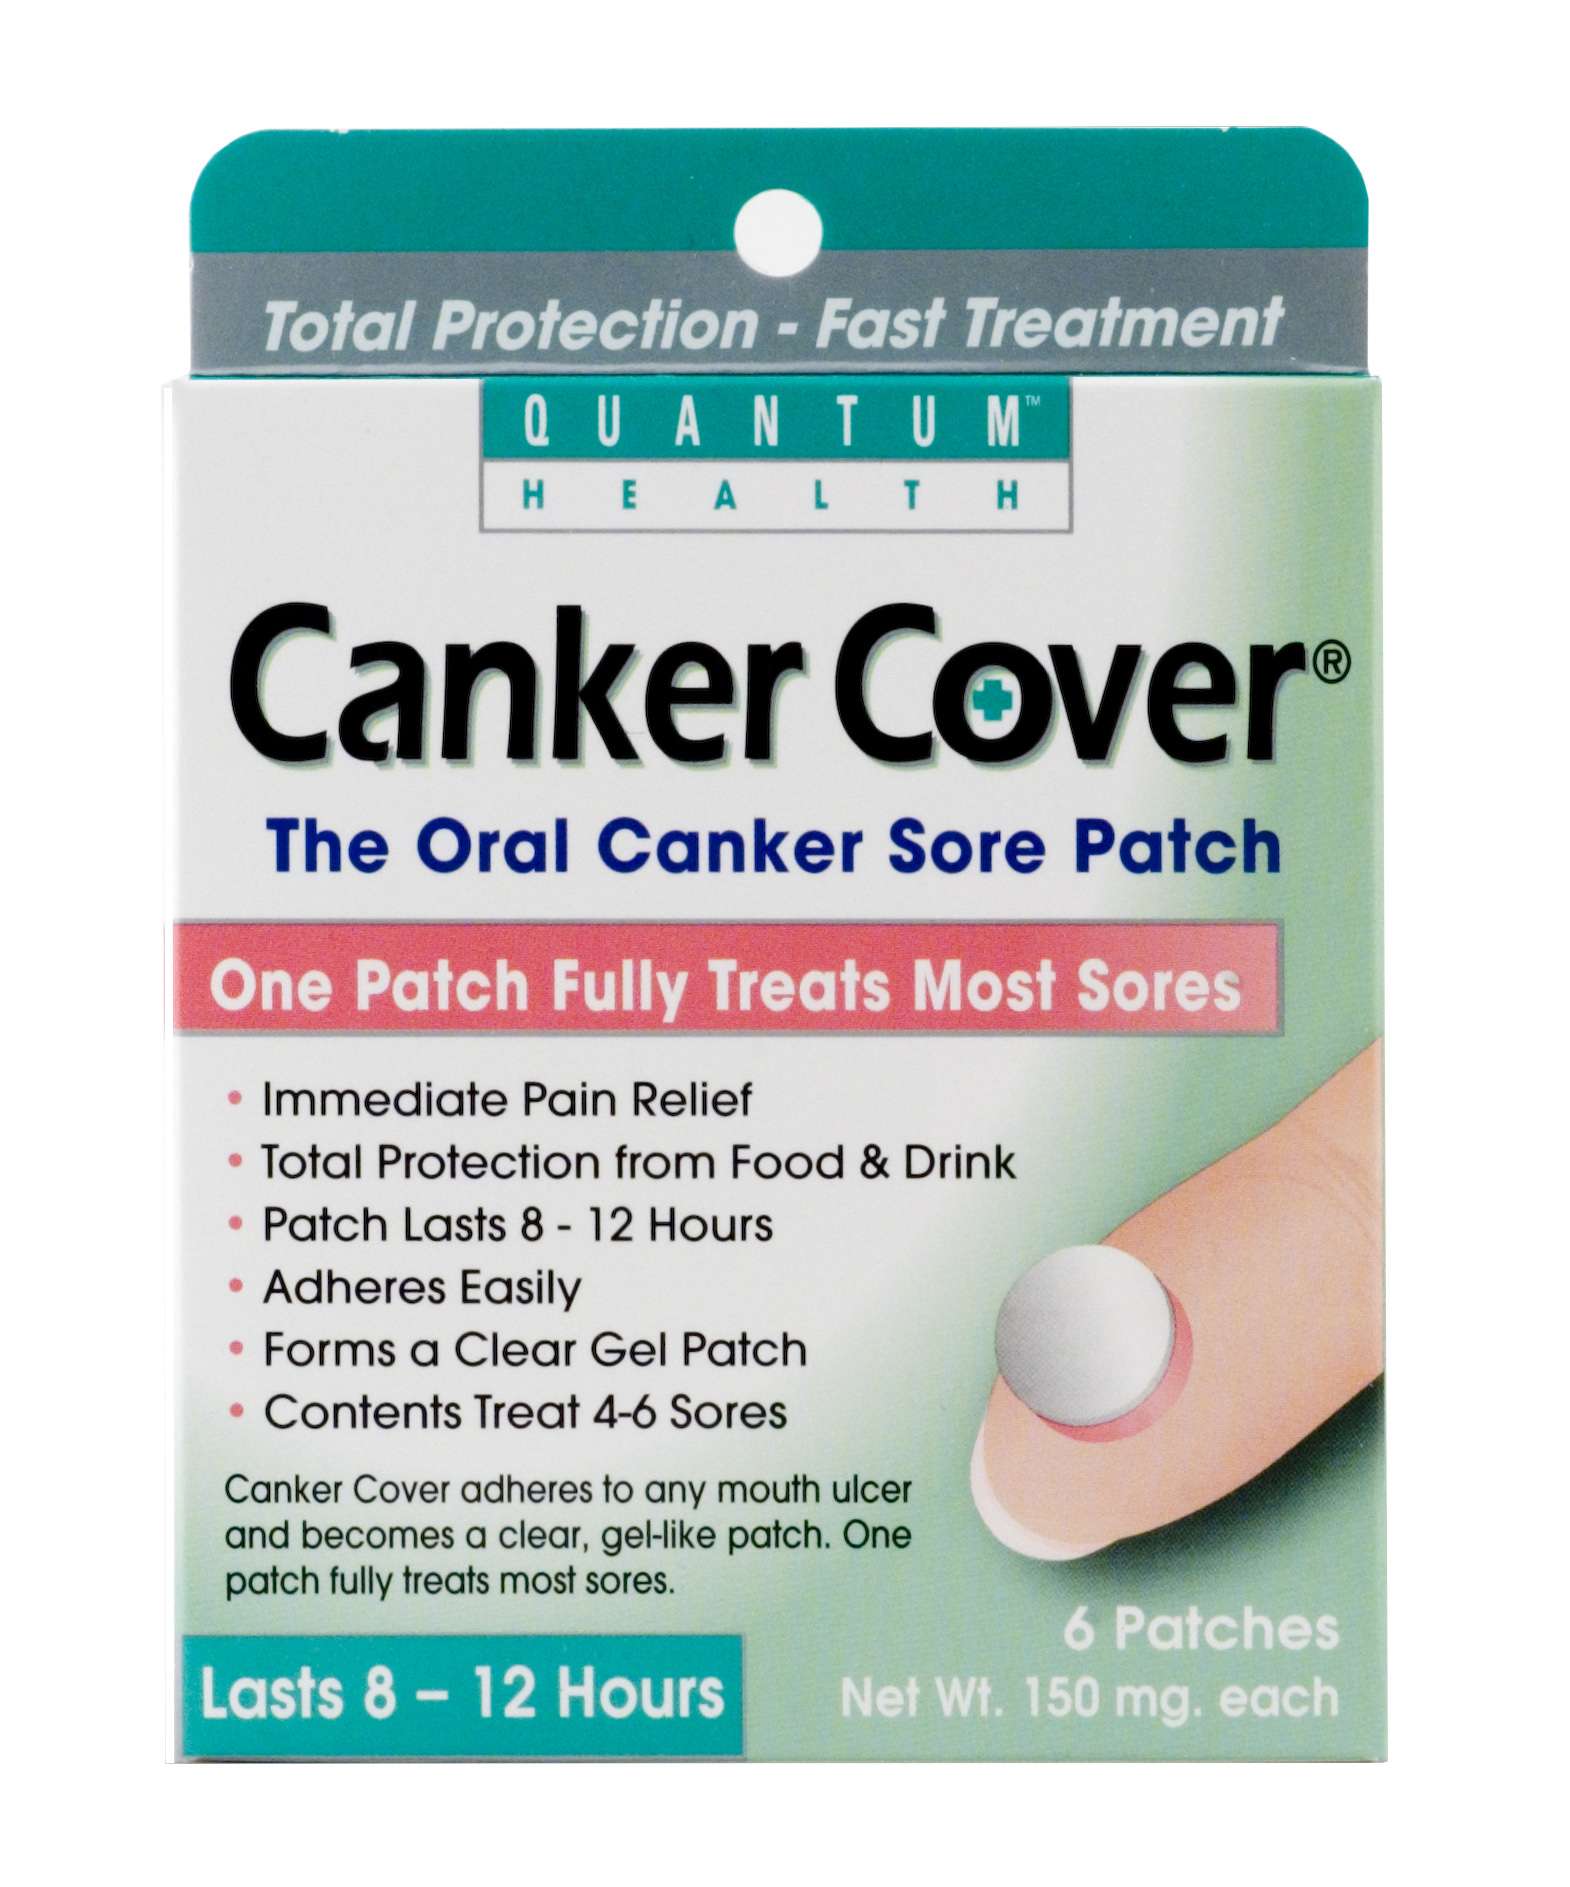 Study: Oral Patch Treatment Heals Canker Sores in One Day ...